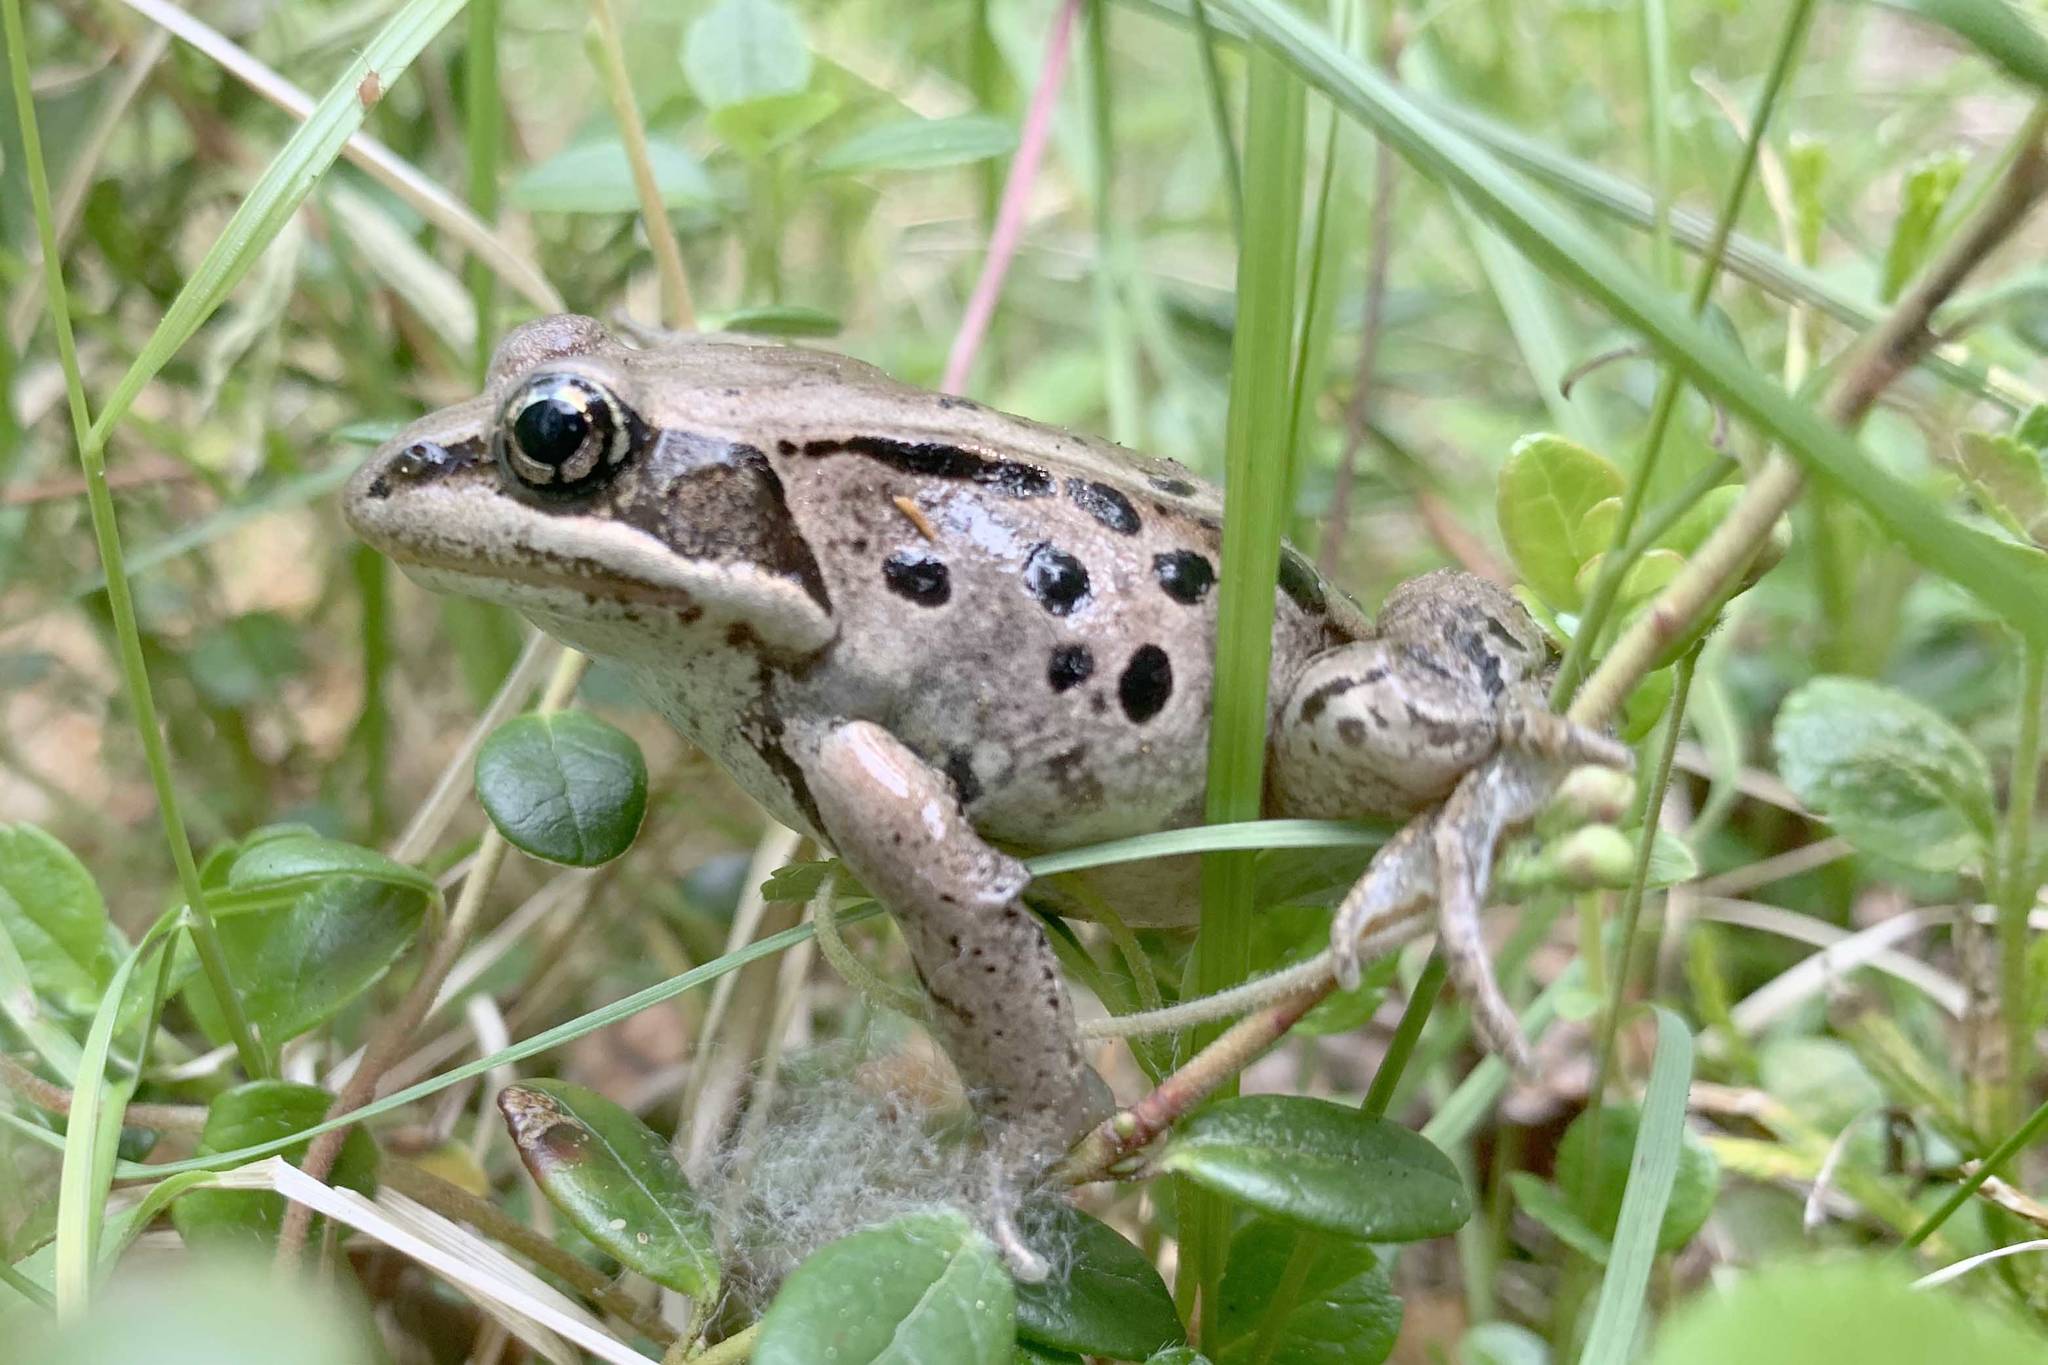 What costs wood frogs an arm and a leg?